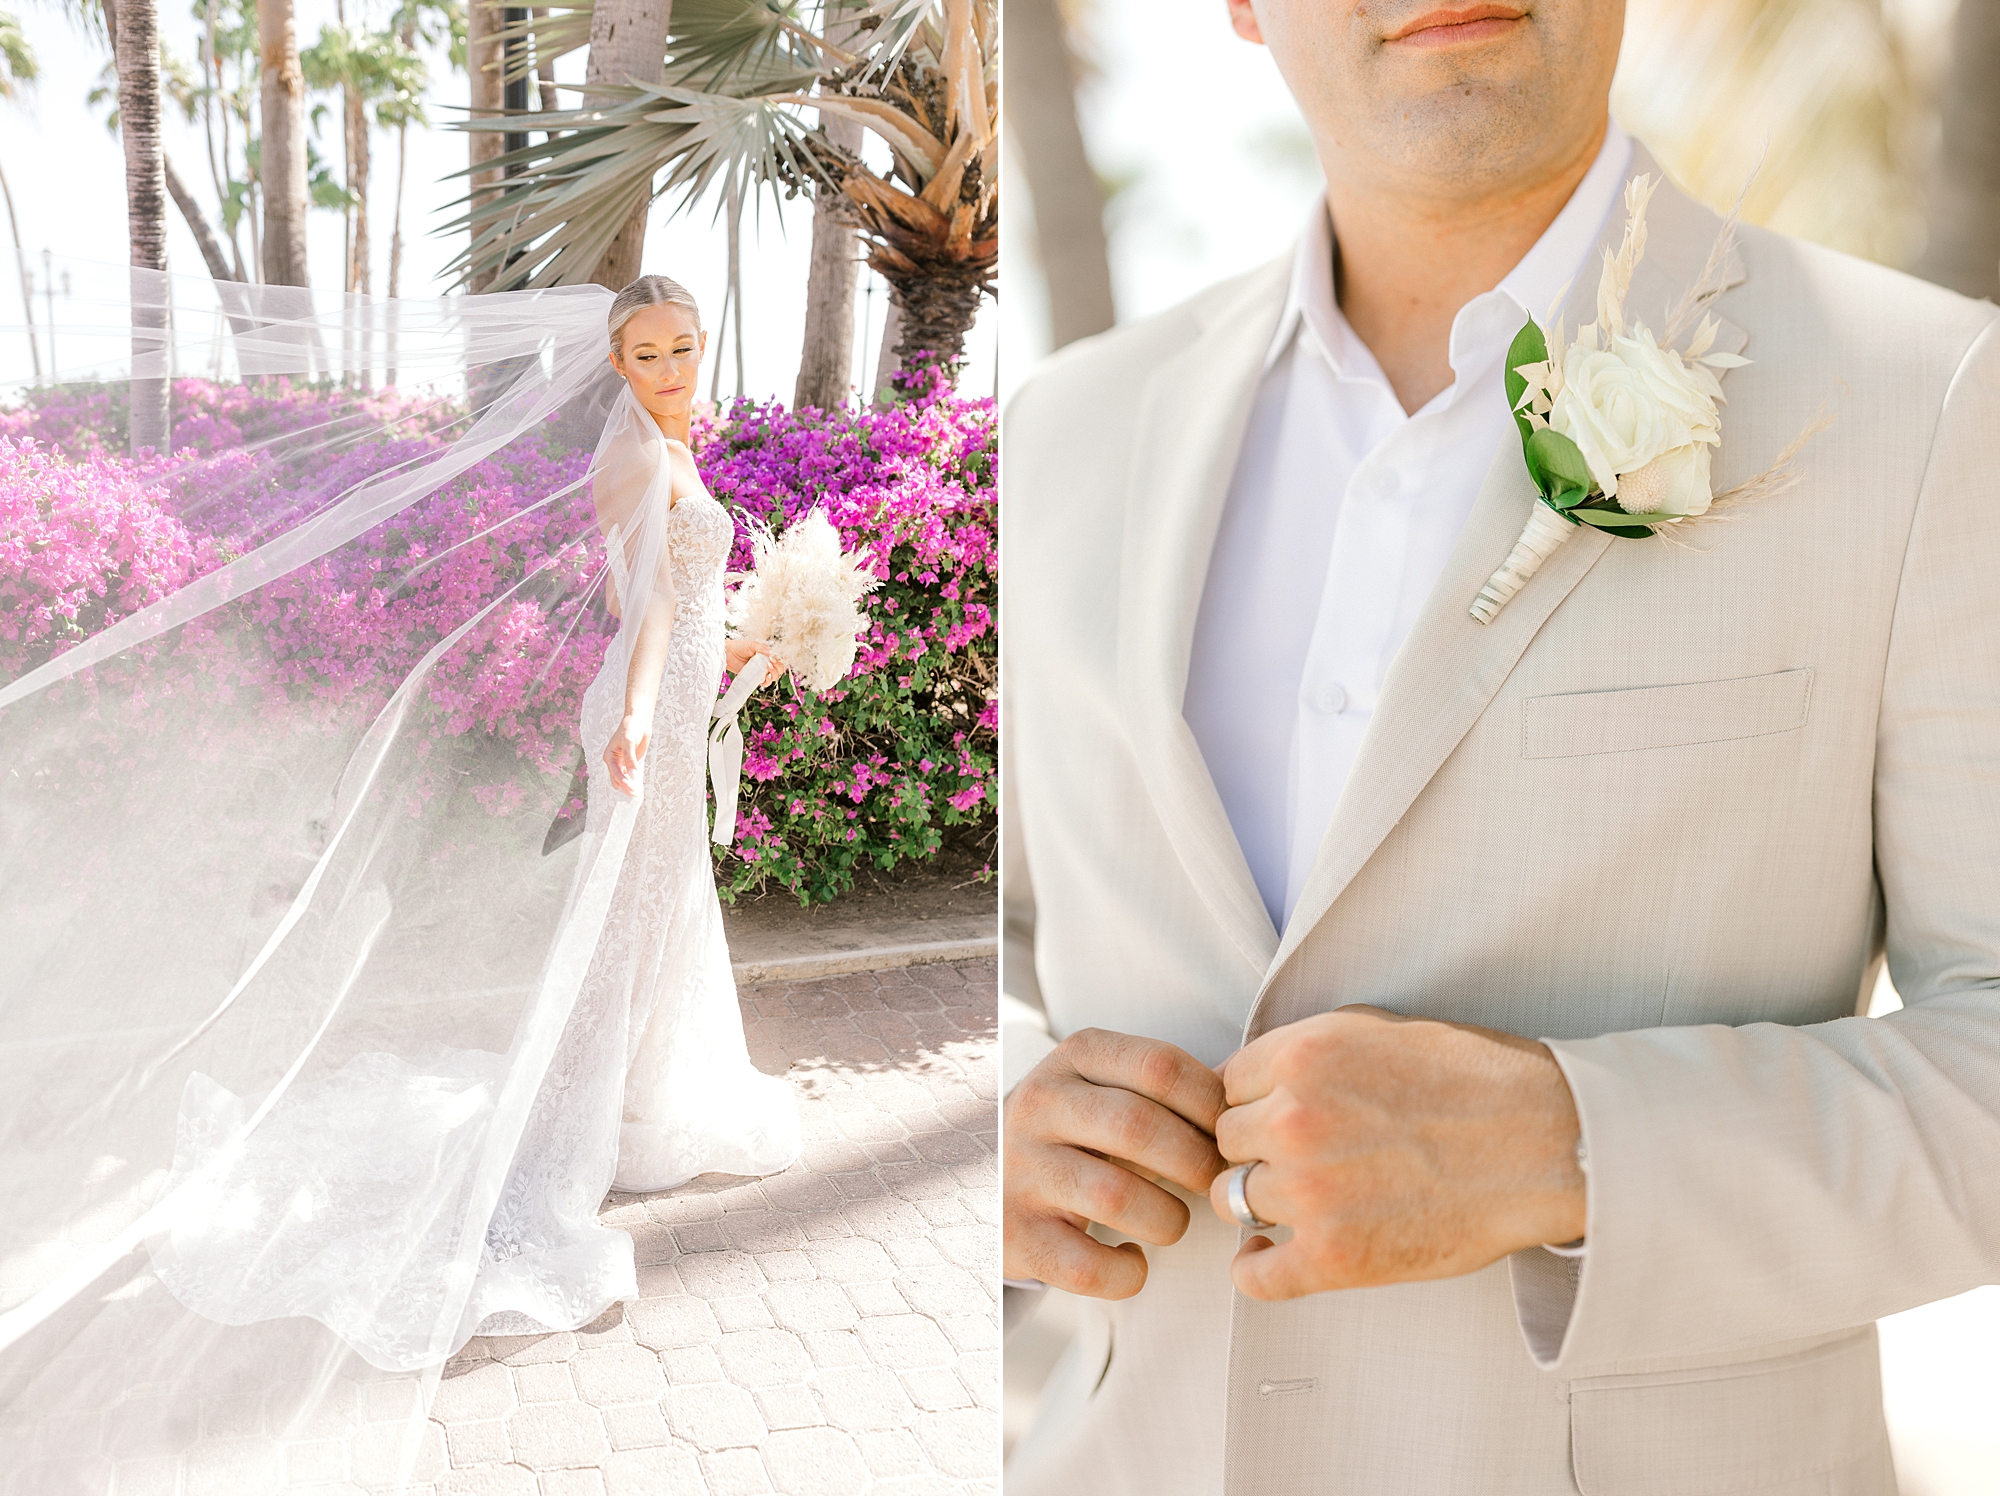 bride poses by purple flowers on Aruba beach while groom buttons up tan jacket